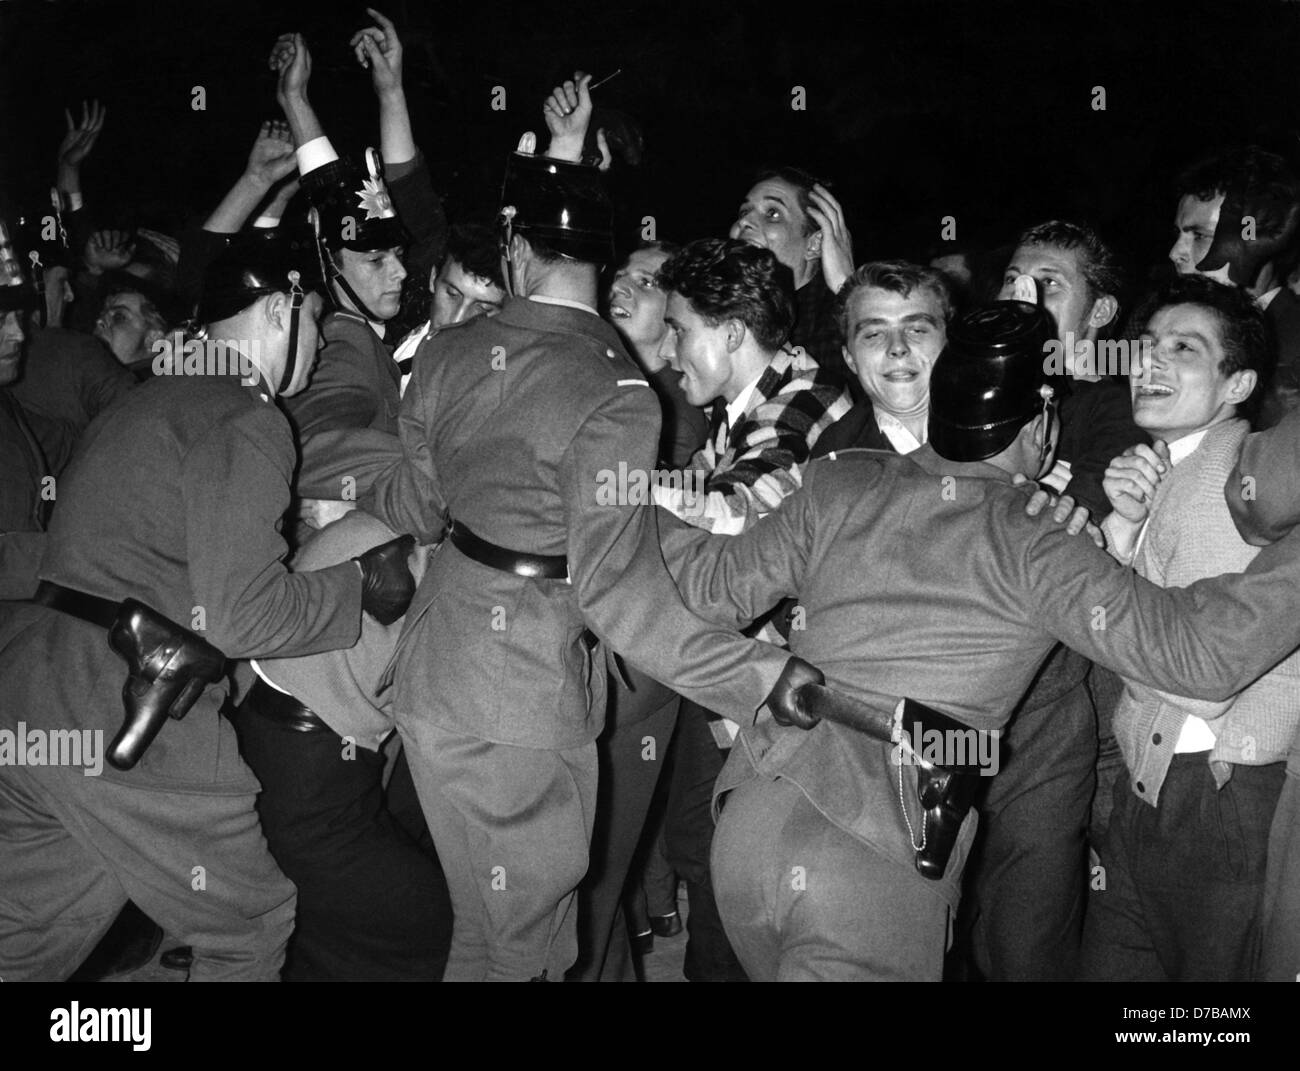 'Rowdies' go wild - police men shove enthusiastic adolescents back during Bill Haley's concert in Frankfurt am Main on the 23rd of October in 1958. Stock Photo